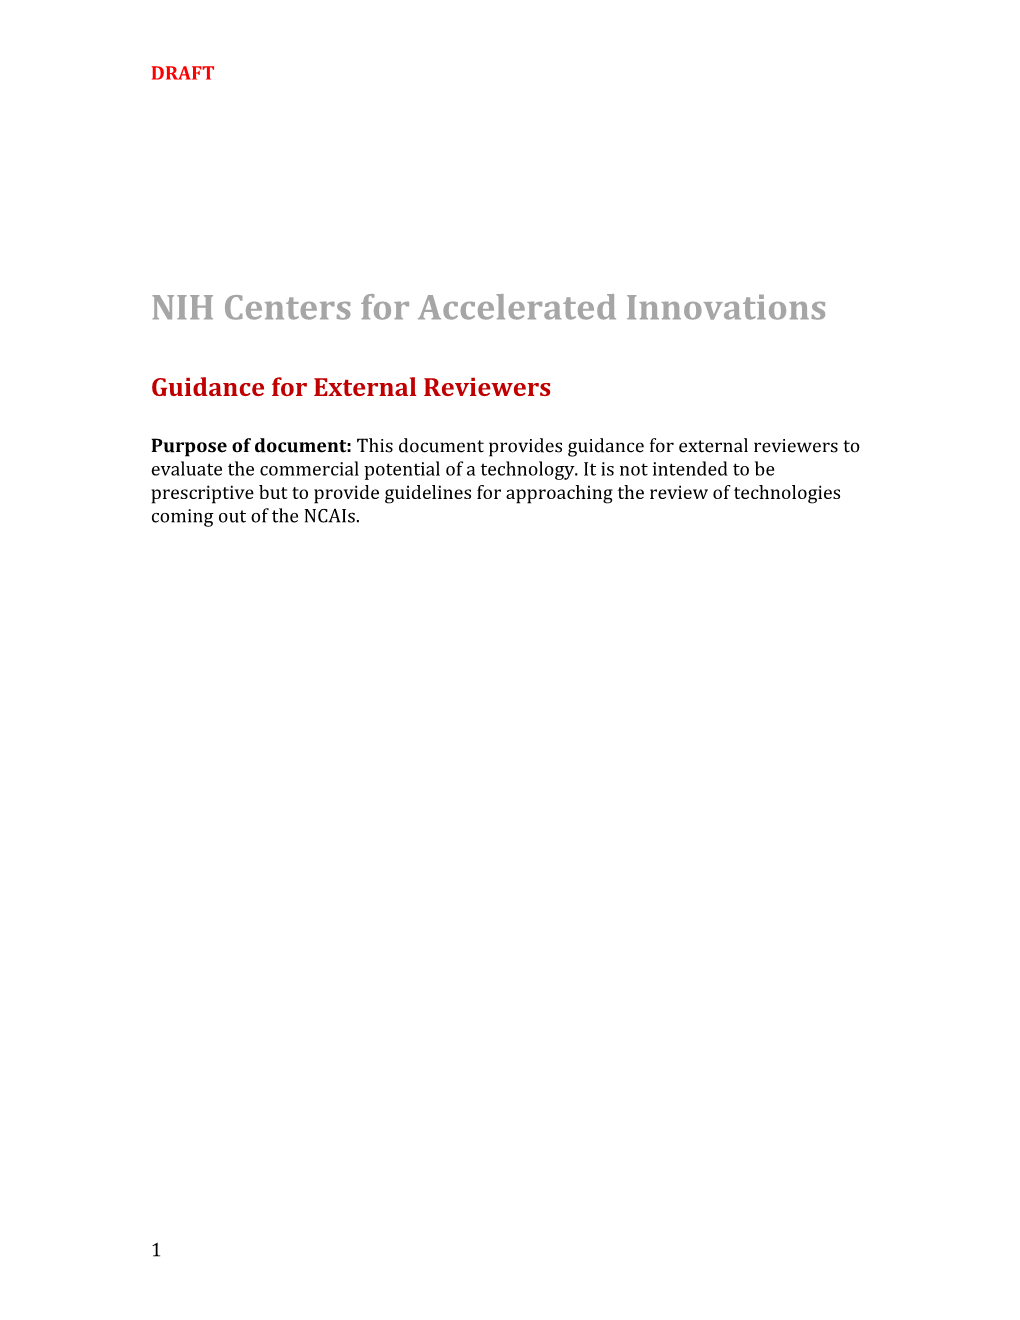 NIH Centers for Accelerated Innovations